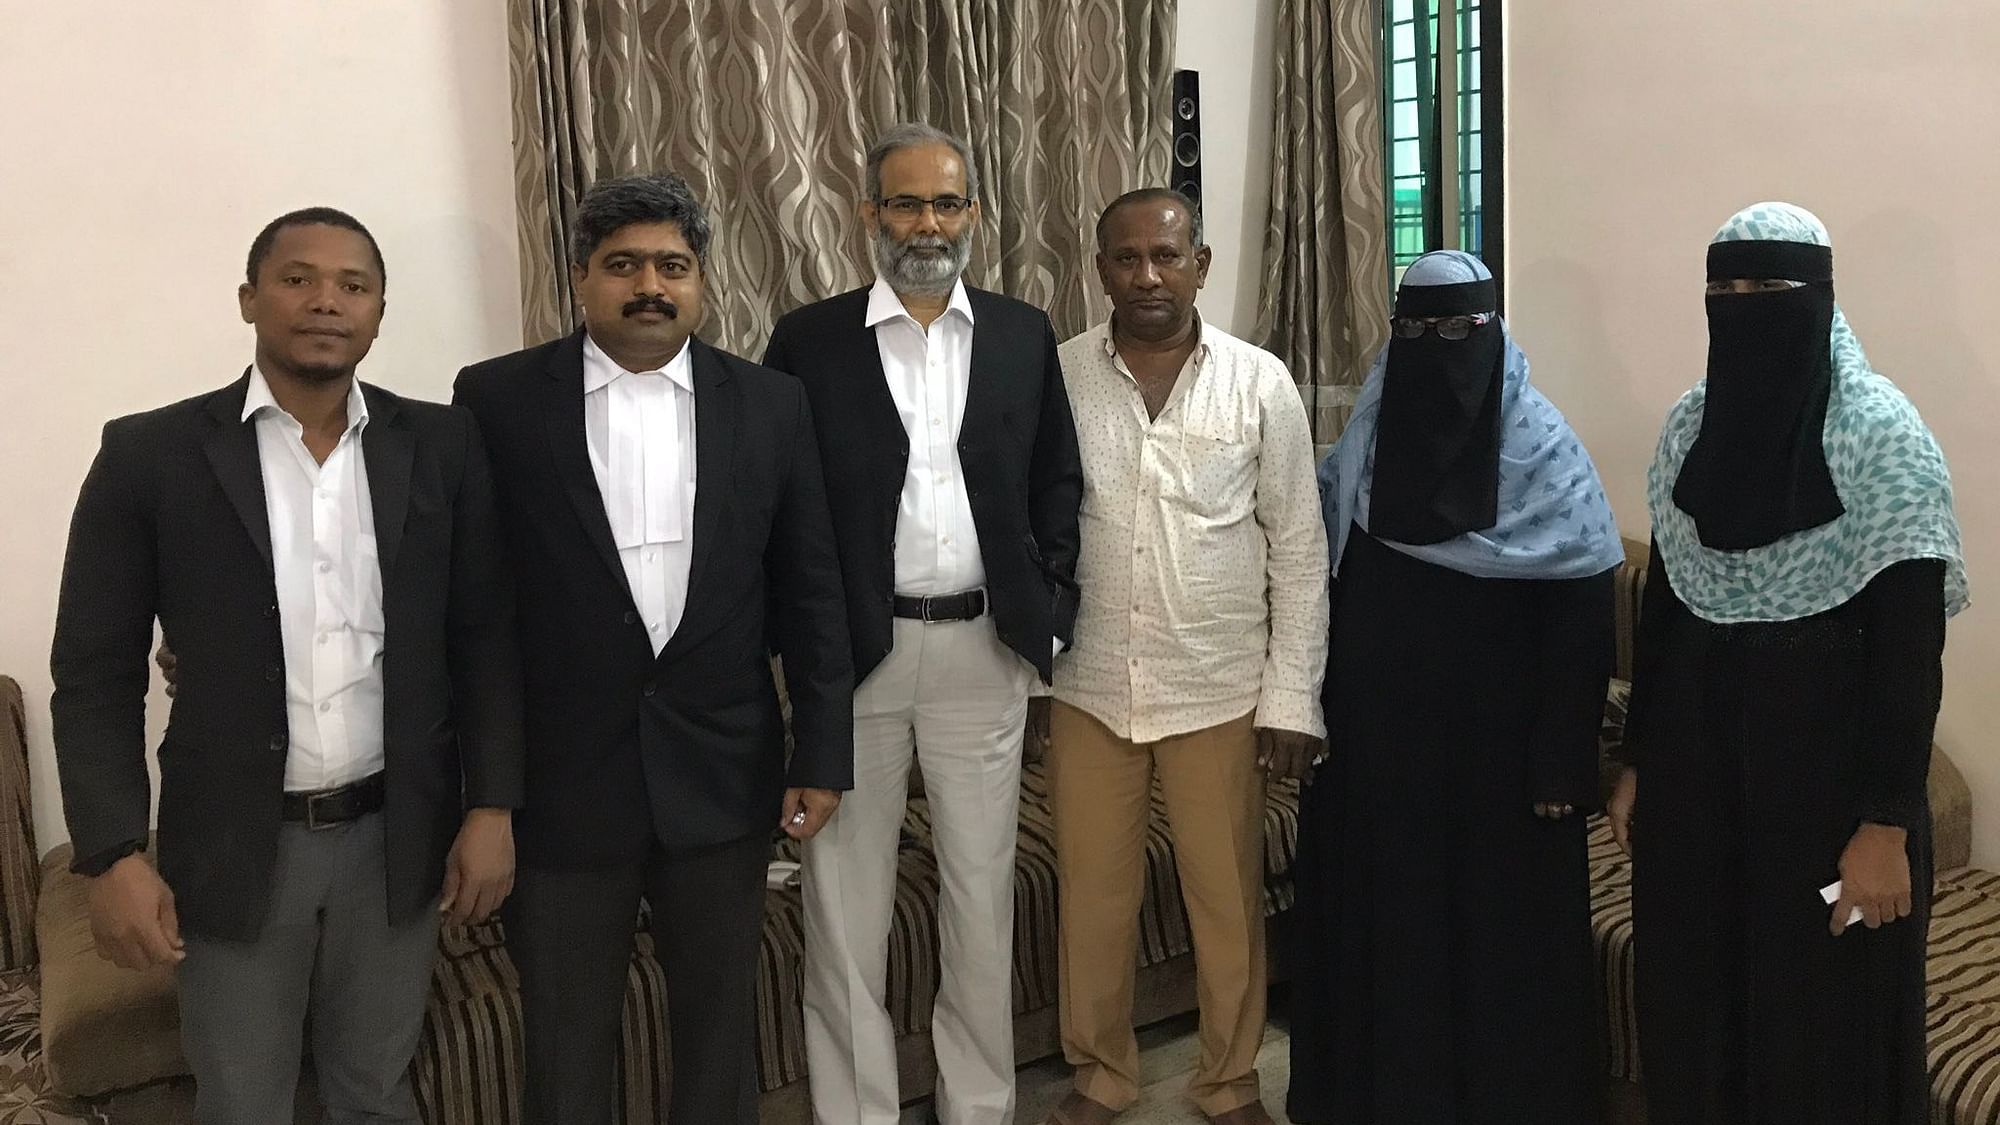 BT Venkatesh, the defense lawyer in the Bidar sedition case, along with his team and the two women he fought to get bail for: Fareeda Begum, headmistress, and single mother, Najbunnisa, after their release.